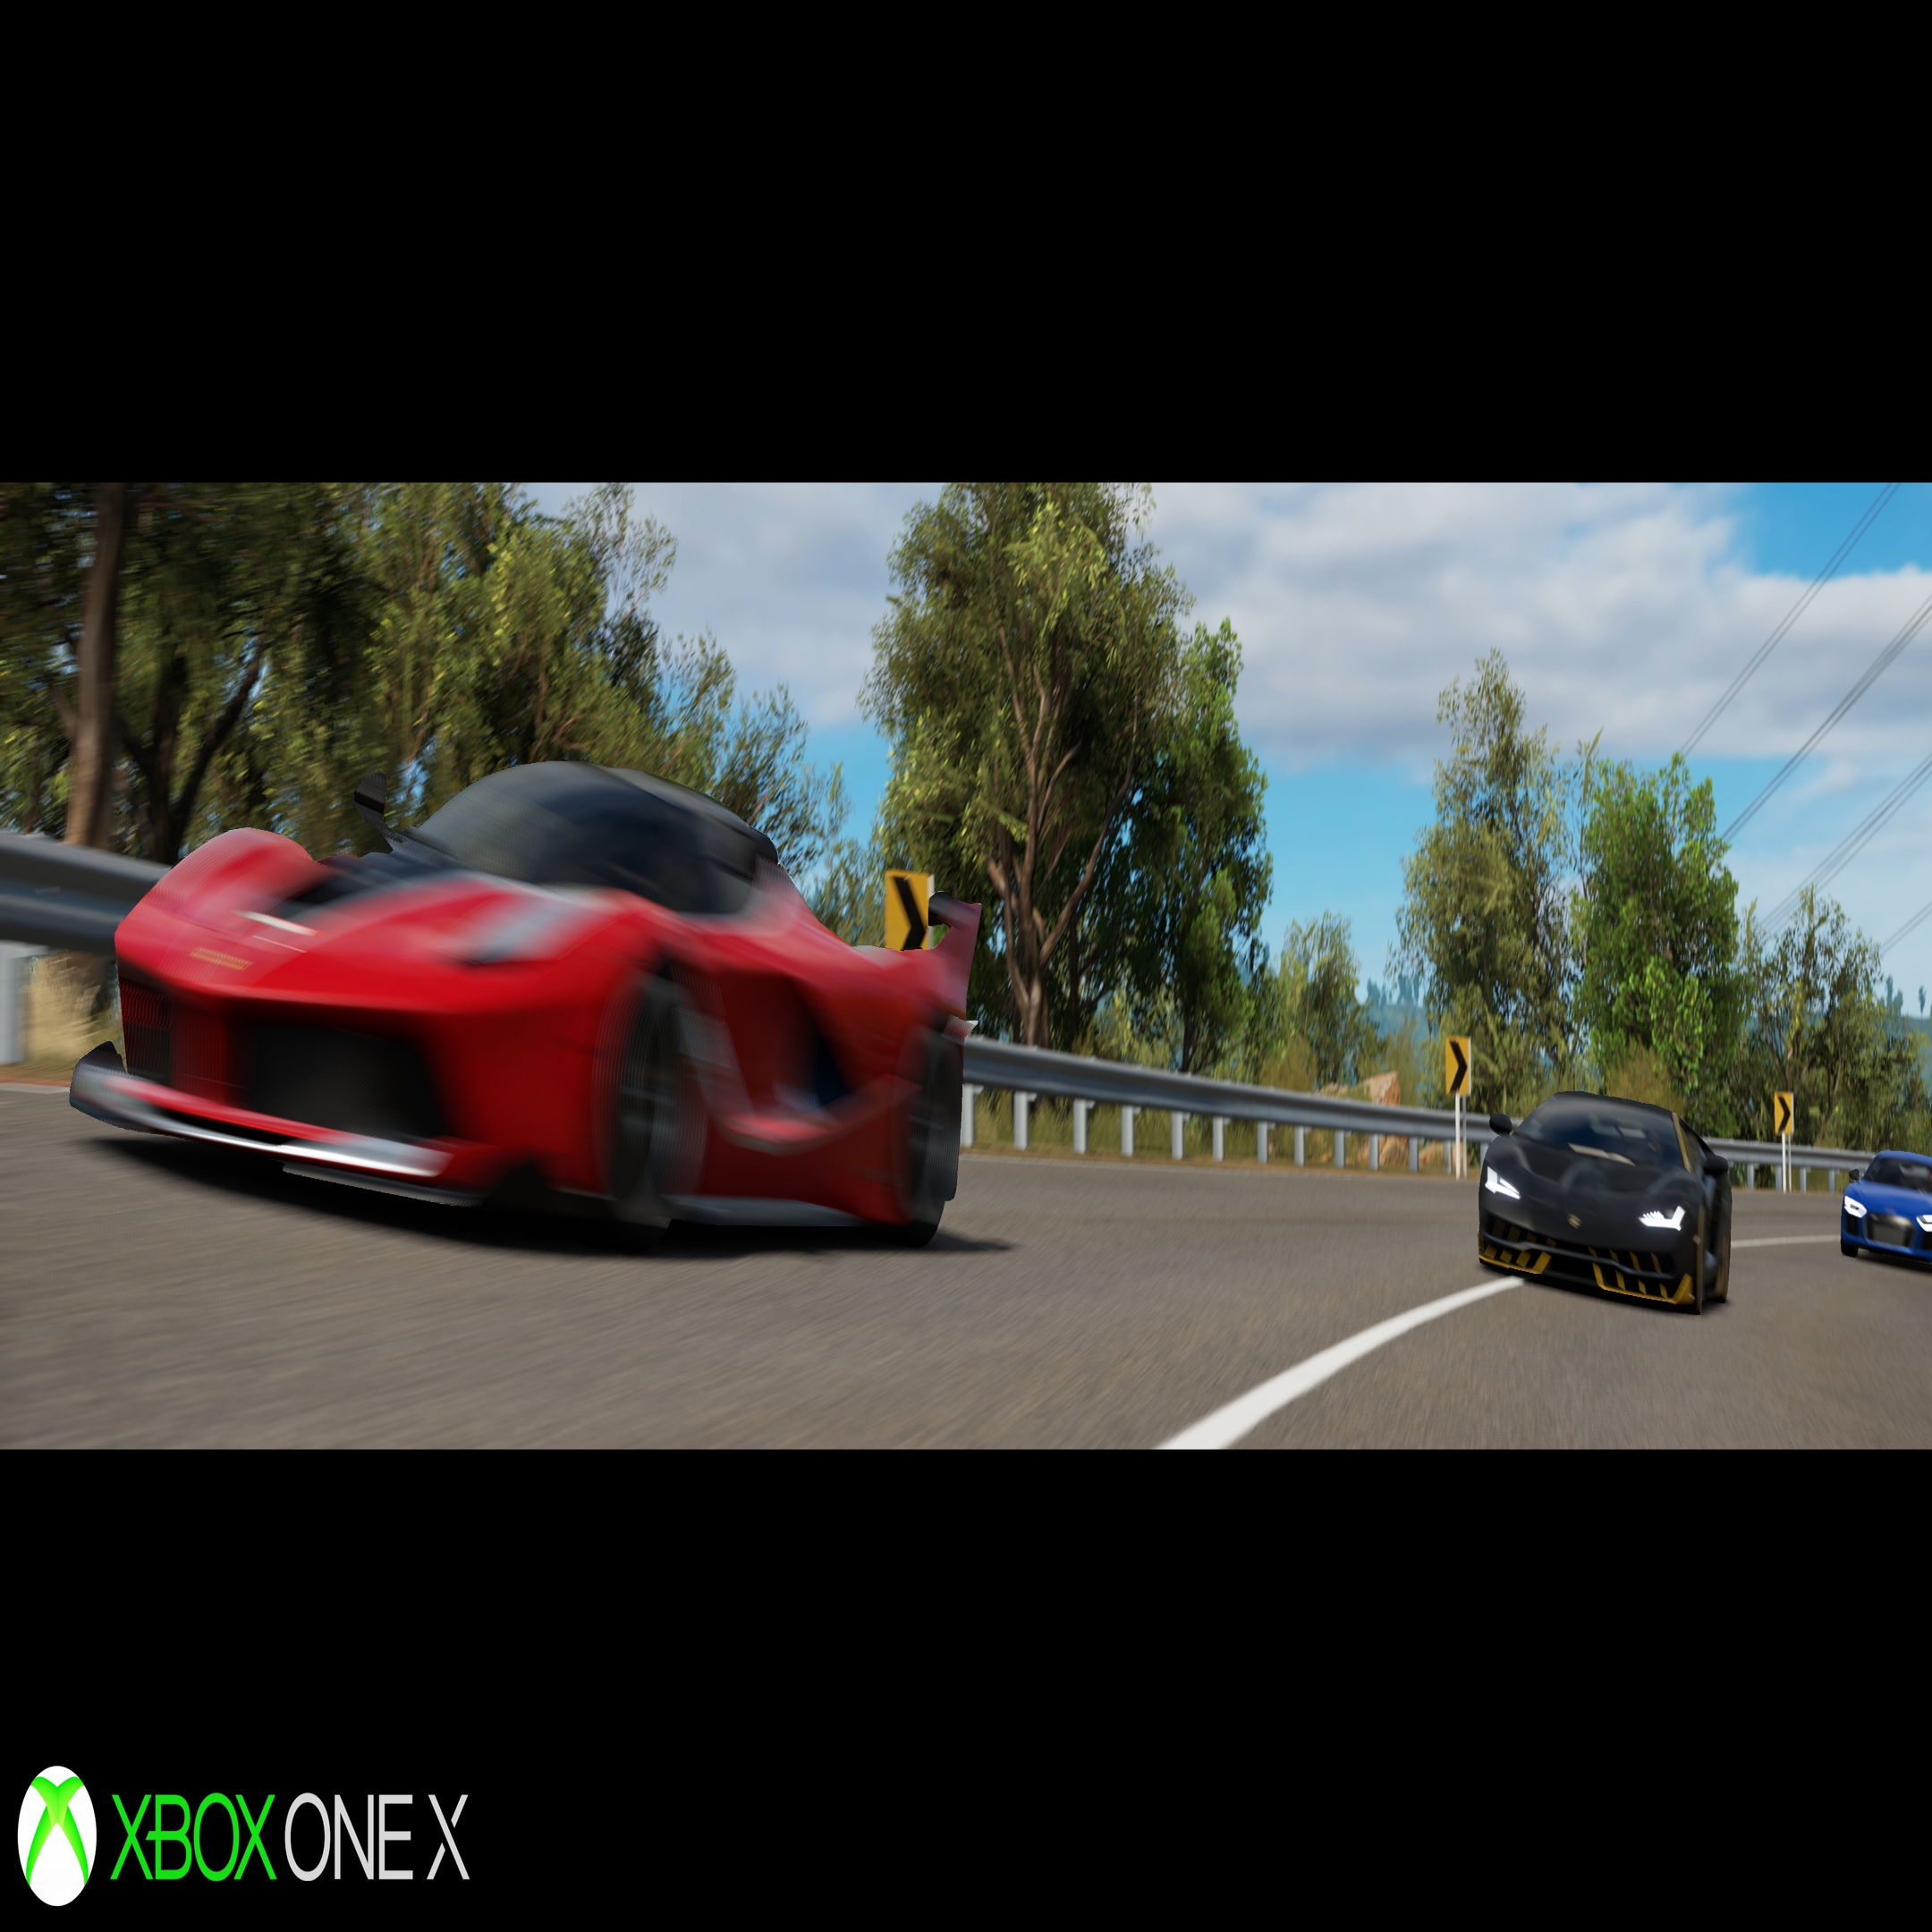 Forza Horizon 3 is enhanced for the Xbox One X – and it's never